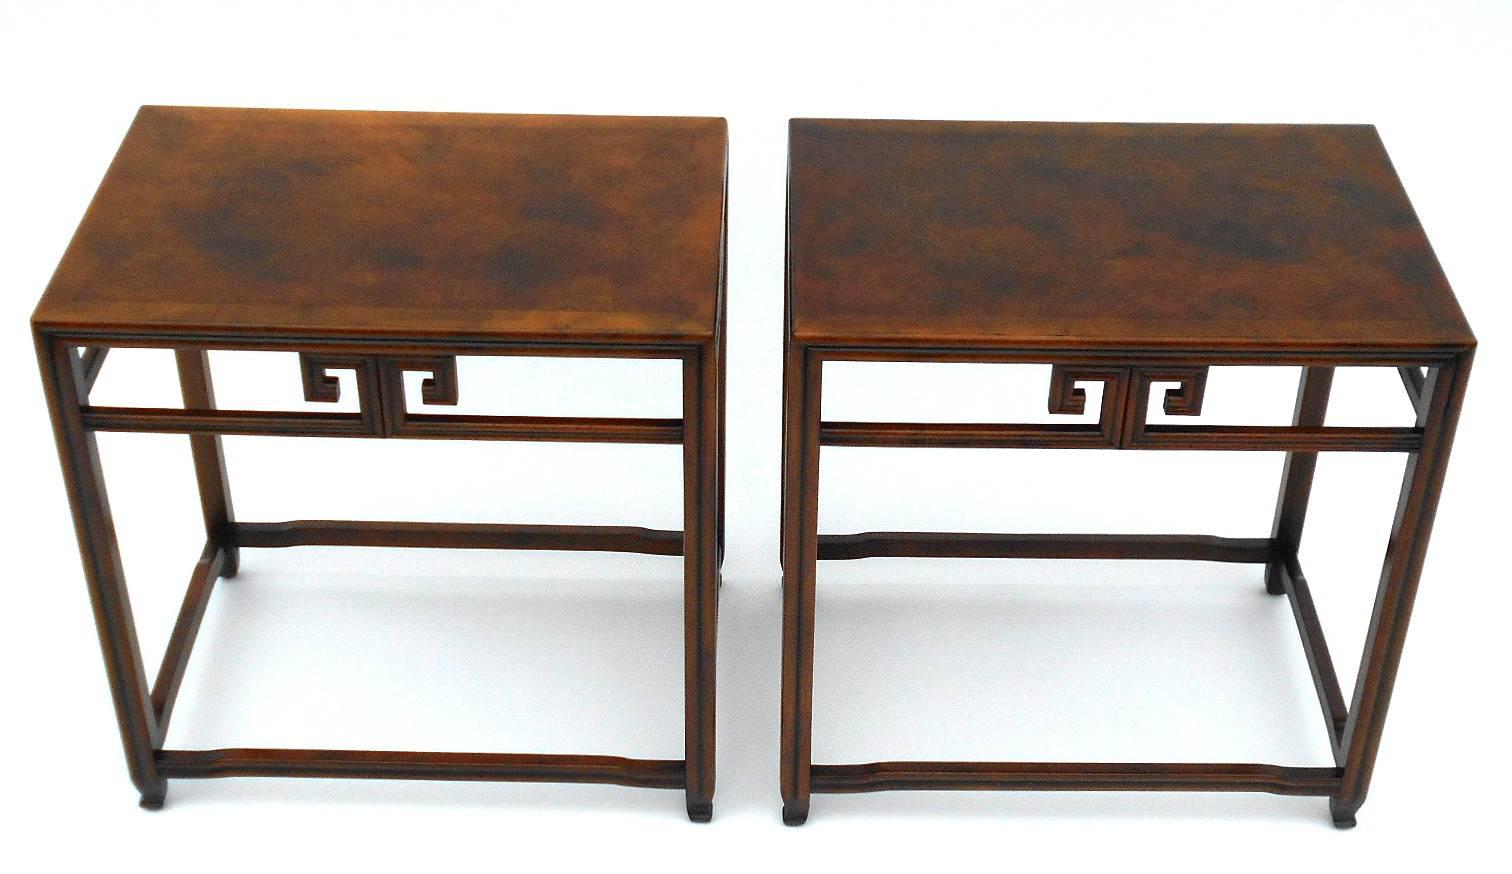 Pair of vintage Asian Style baker furniture side tables. They have burl tops.